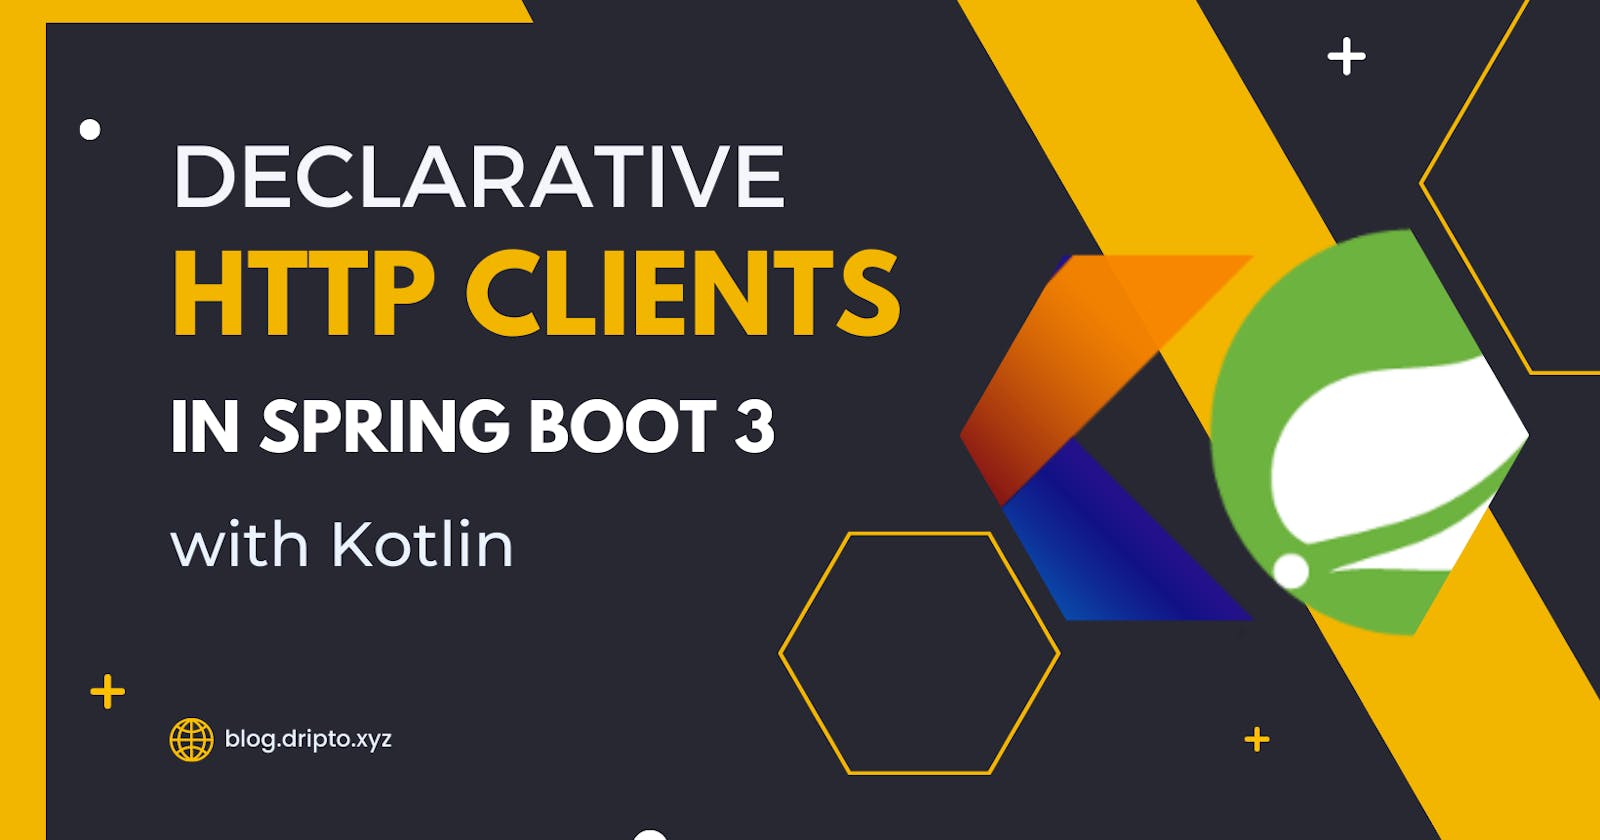 Declarative HTTP Clients in Spring Boot 3 with Kotlin